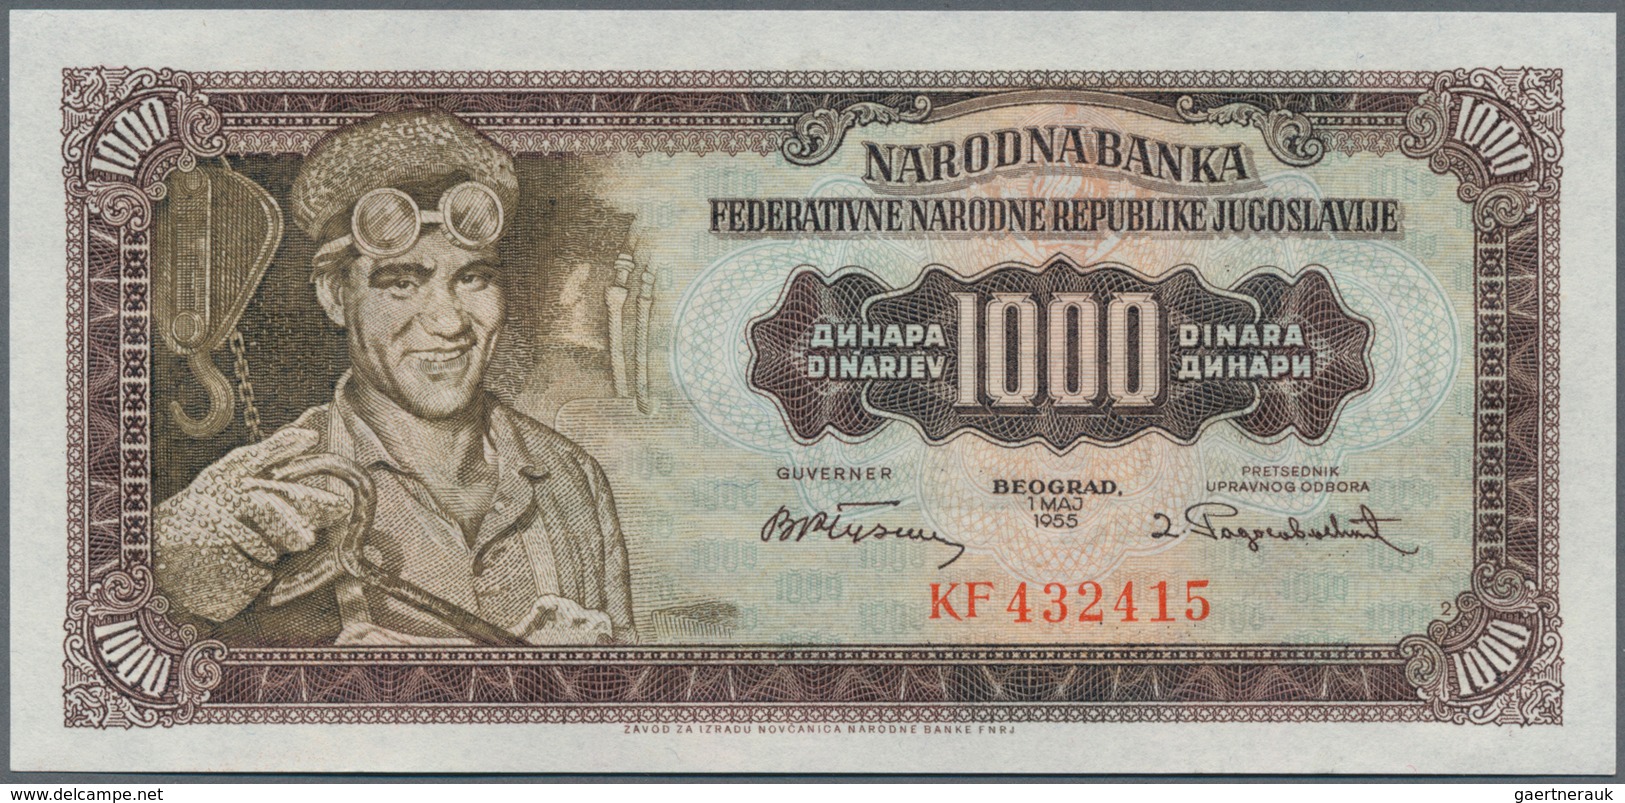 Yugoslavia / Jugoslavien: Very nice set of the 1946 and 1955 series comprising 50, 2 x 100, 500 and